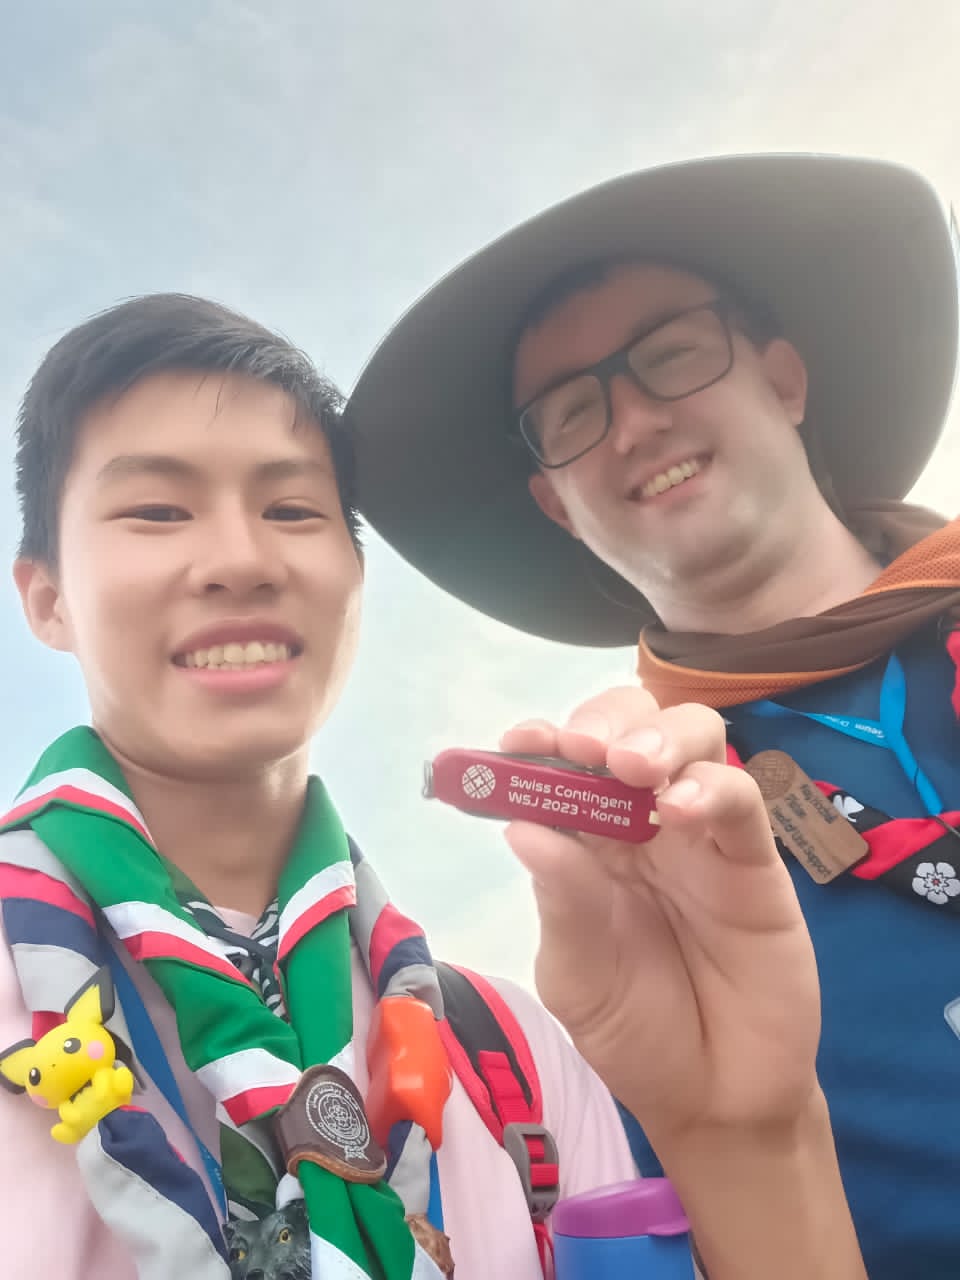 Zhi yuan and his friends at 25th world scout jamboree